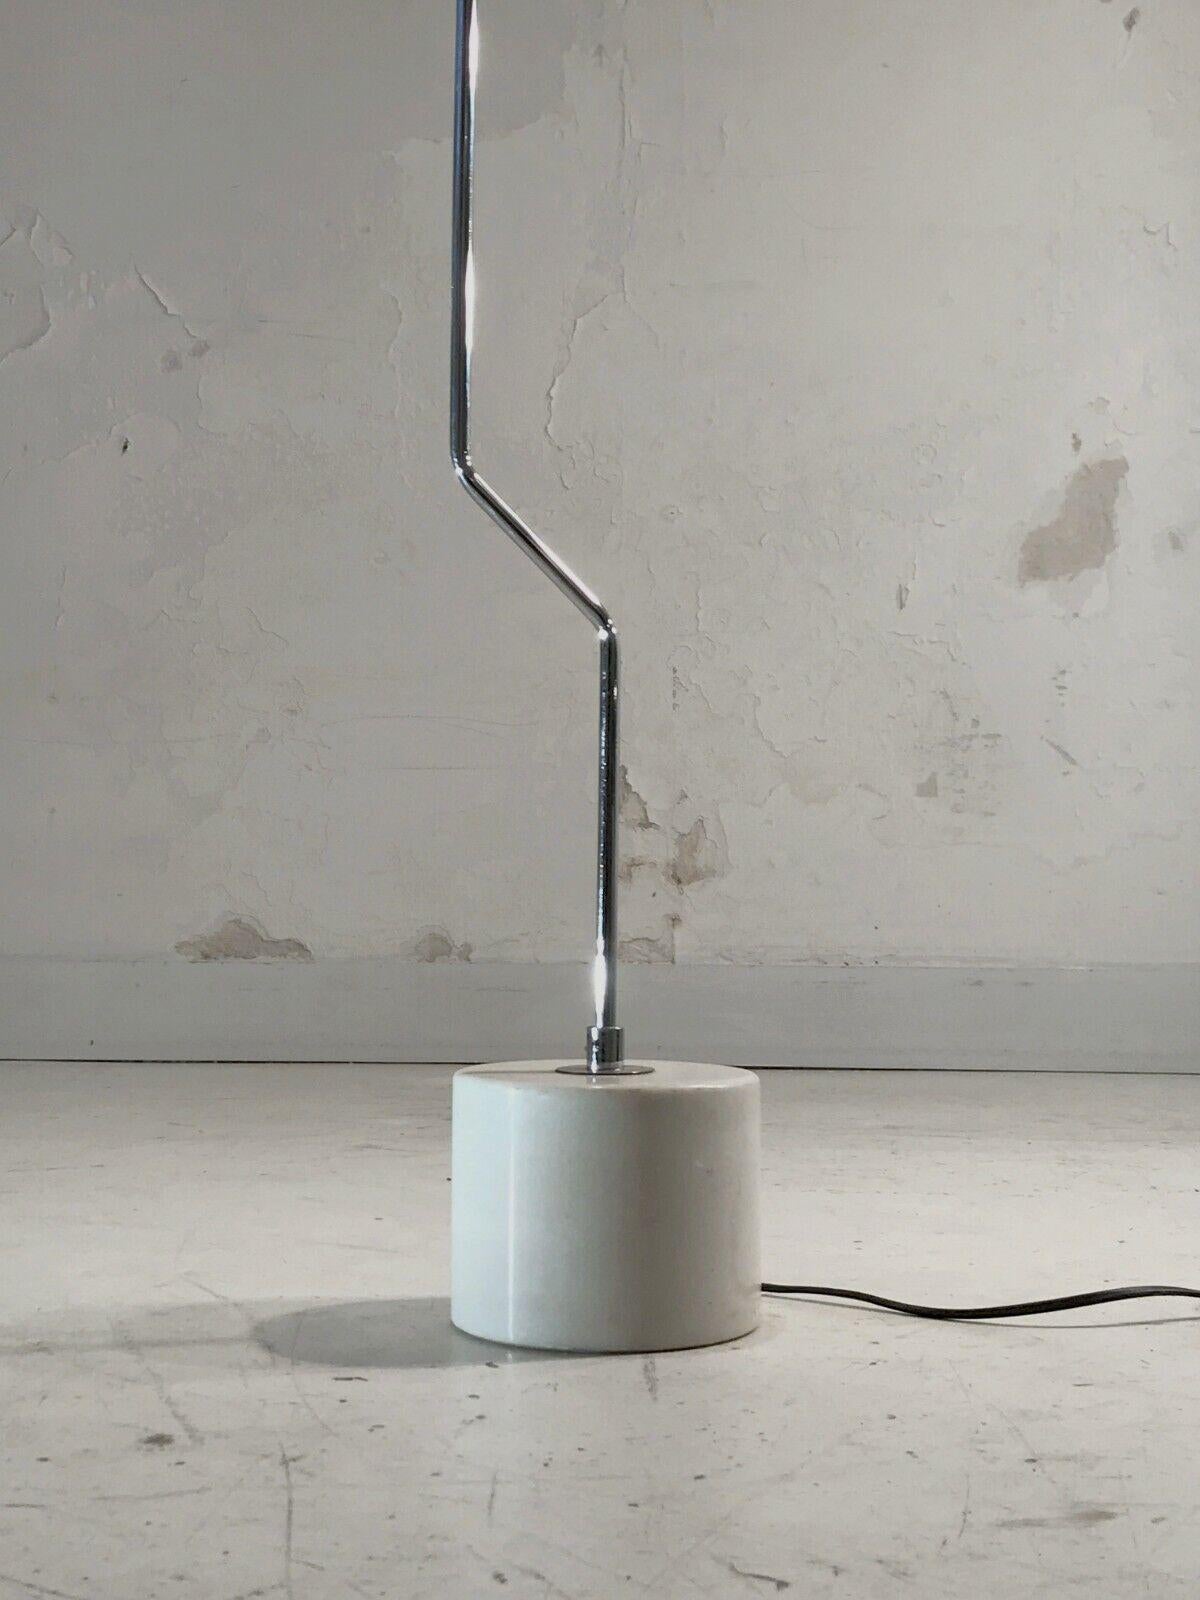 A rare minimalist floor lamp, with a cylindrical base in white Carrare massive marble, with a vertical metallic axis displaced on diagonal at the bottom, with a black lacquered metallic structure made for a Cornalux light-bulb. Simple and elegant.